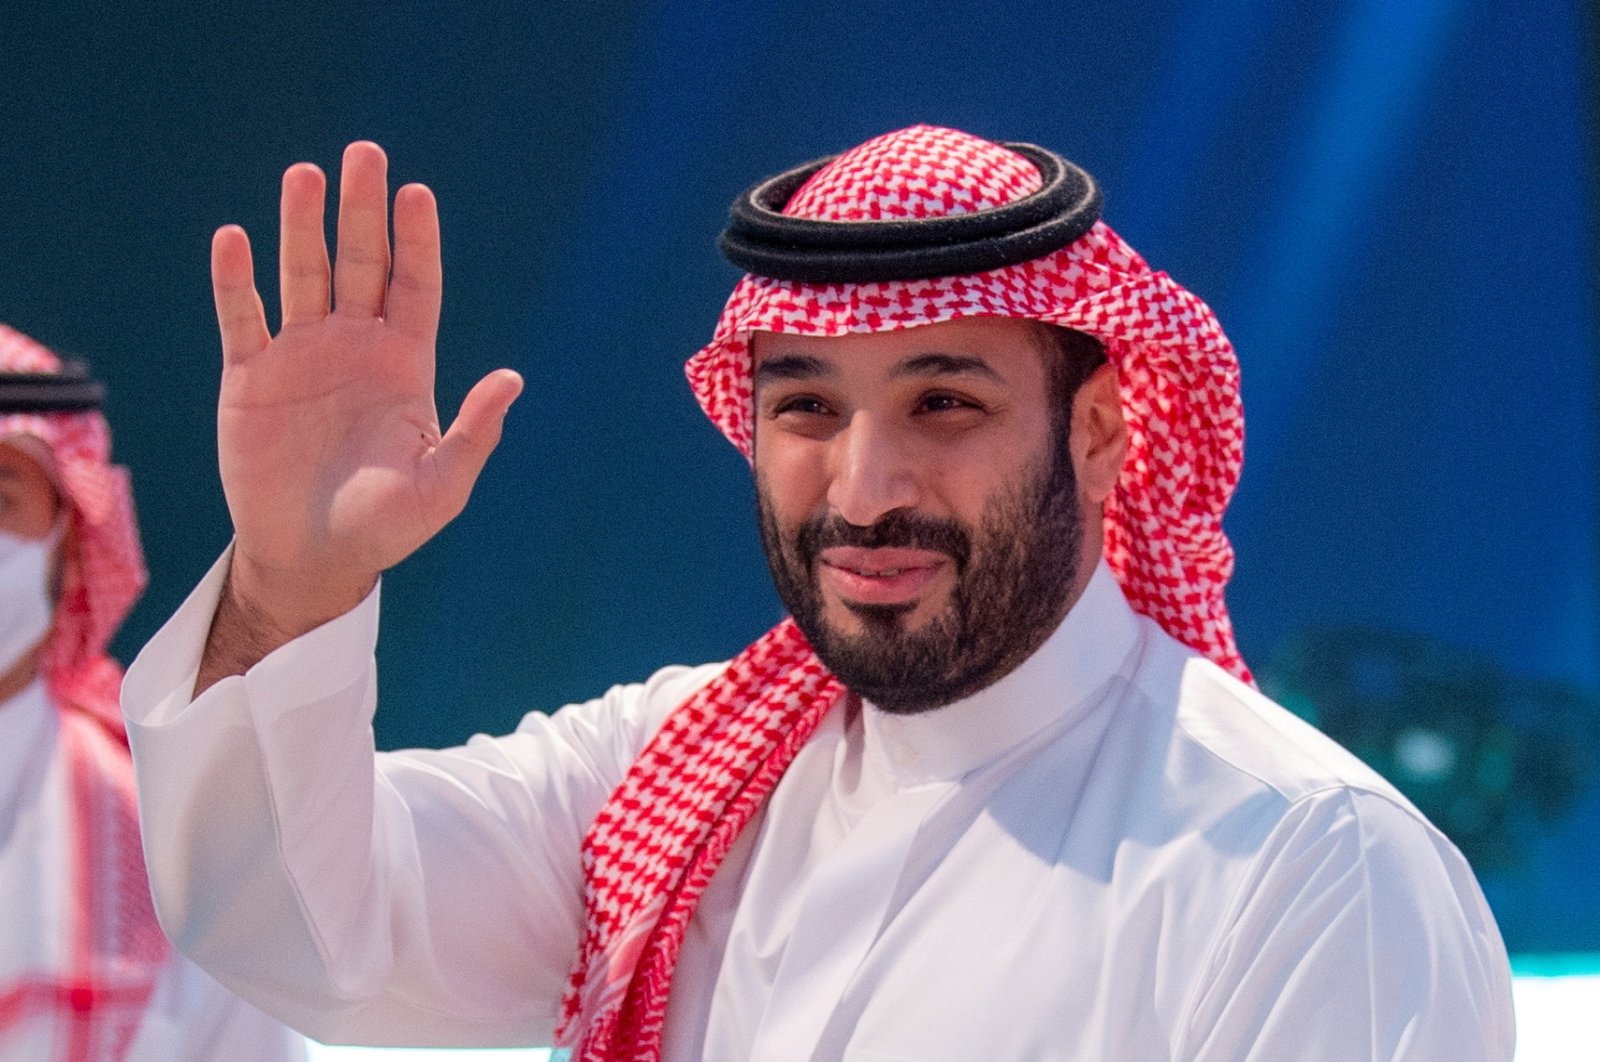 Saudi Crown Prince, M. bin Salman arrives at the opening session of the Future Investment Initiative Conference in Riyadh, Saudi Arabia, October 26, 2021. (Bandar Algaloud / Courtesy of Saudi Royal Court / Handout via Reuters, File)